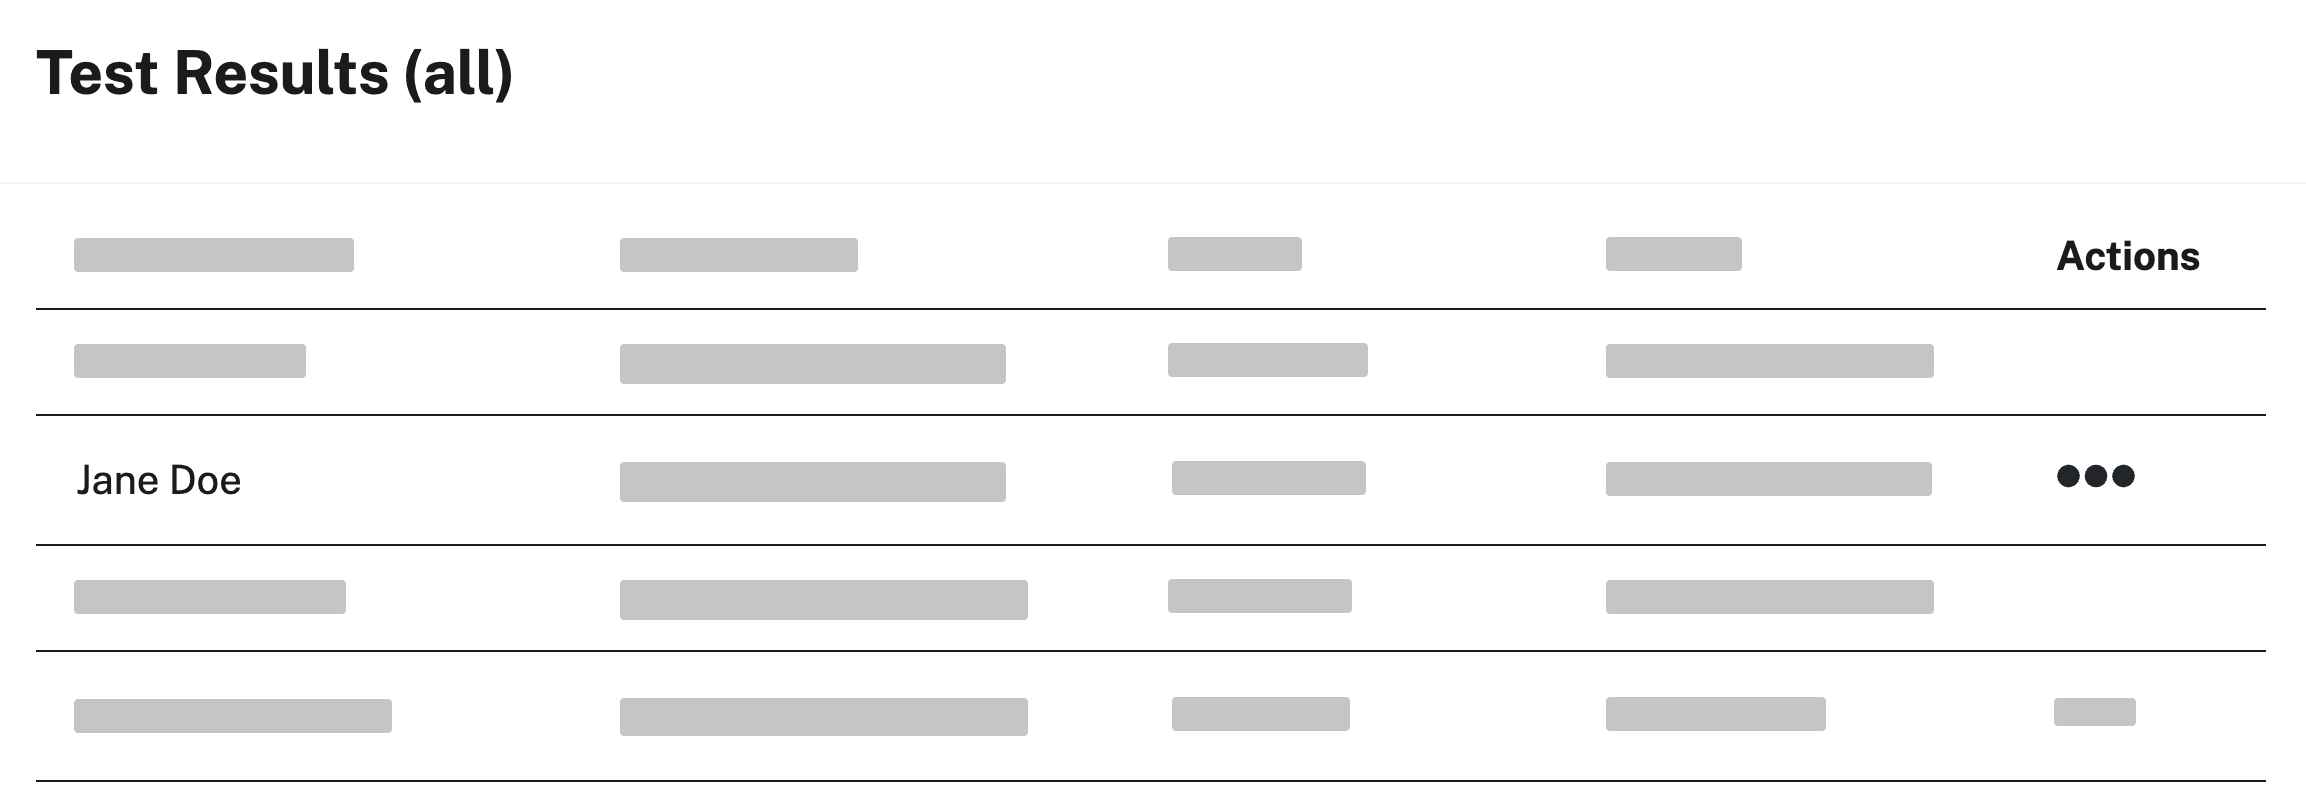 A table of test results in SimpleReport, showing the three dots icon under the "Actions" column